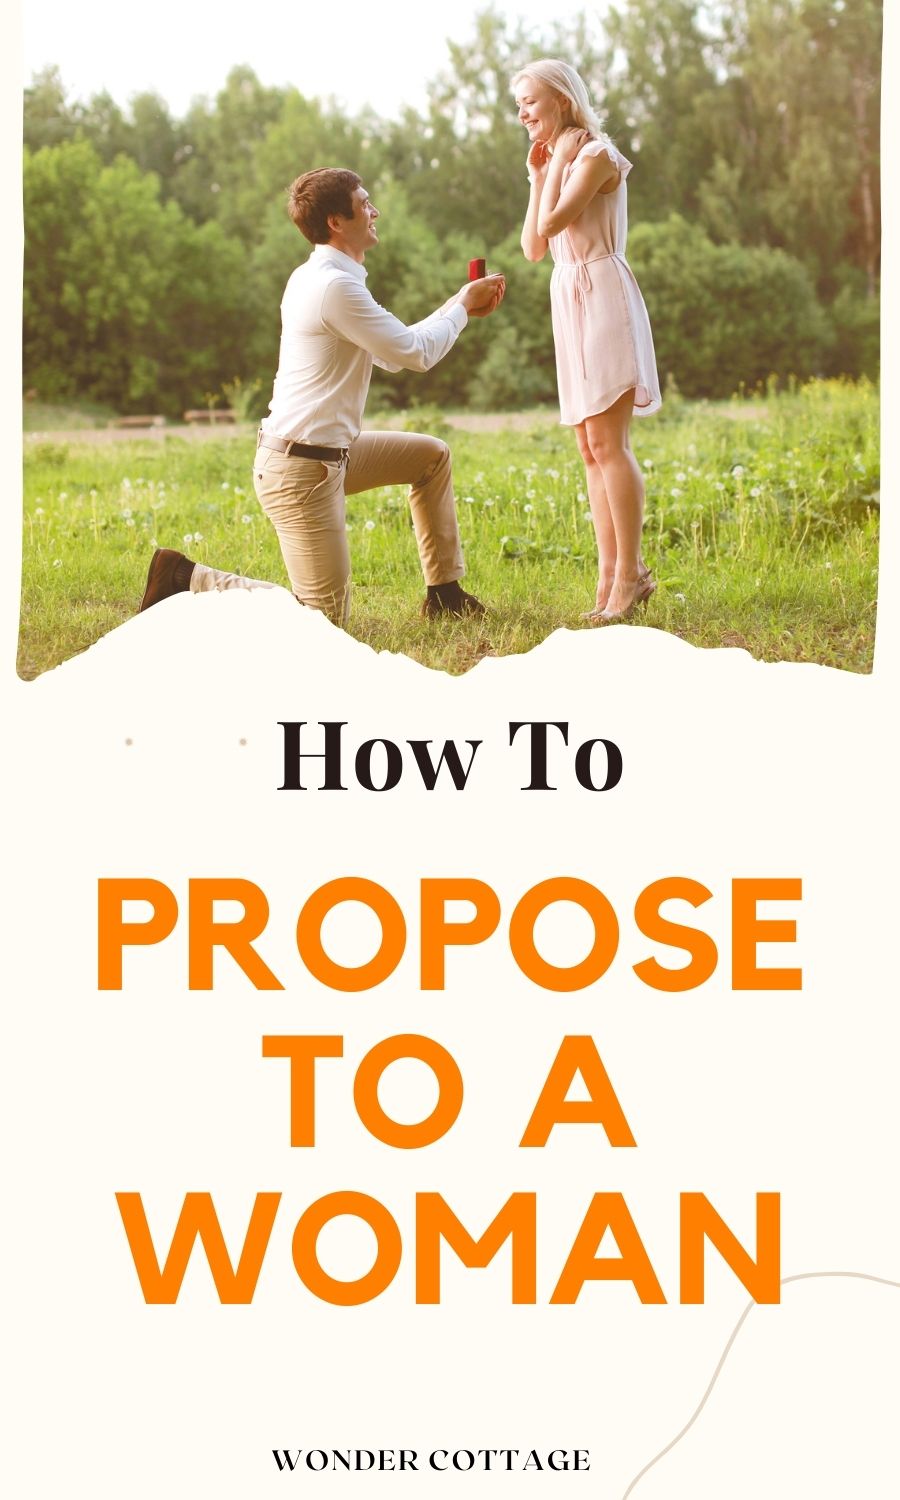 How To Propose To A Woman For Marriage